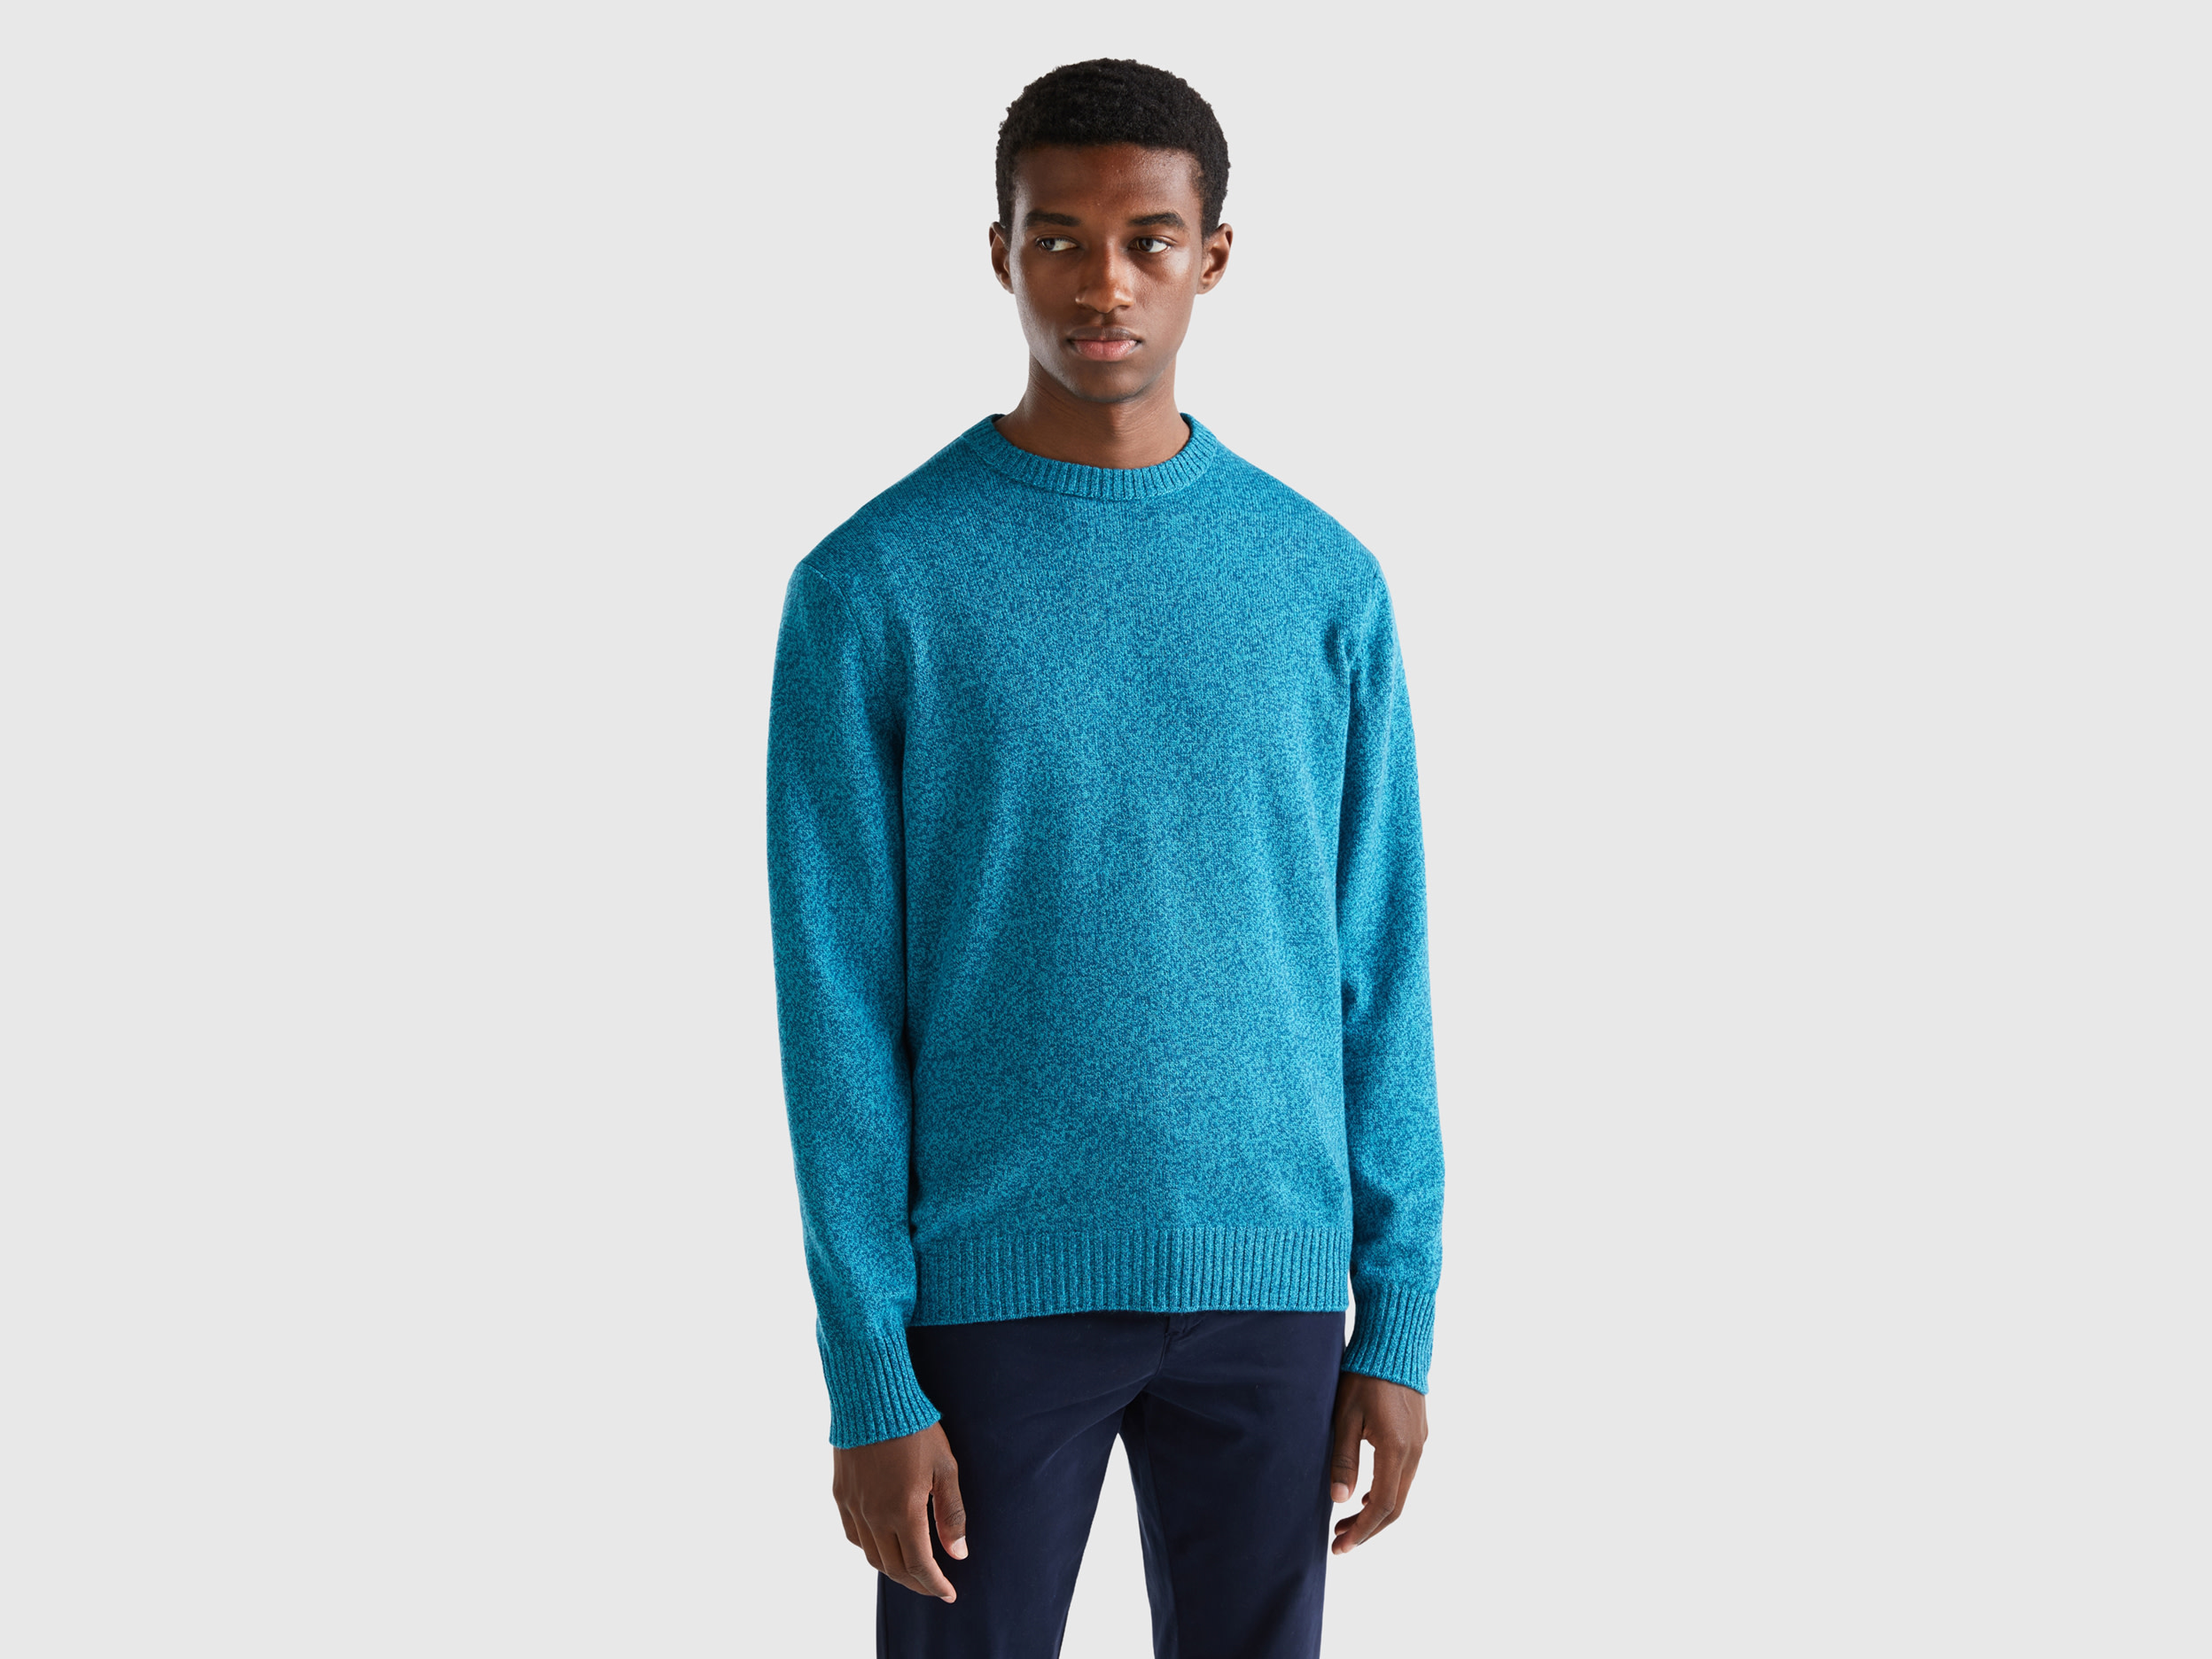 Benetton, Crew Neck Sweater In Cashmere And Wool Blend, size S, Blue, Men